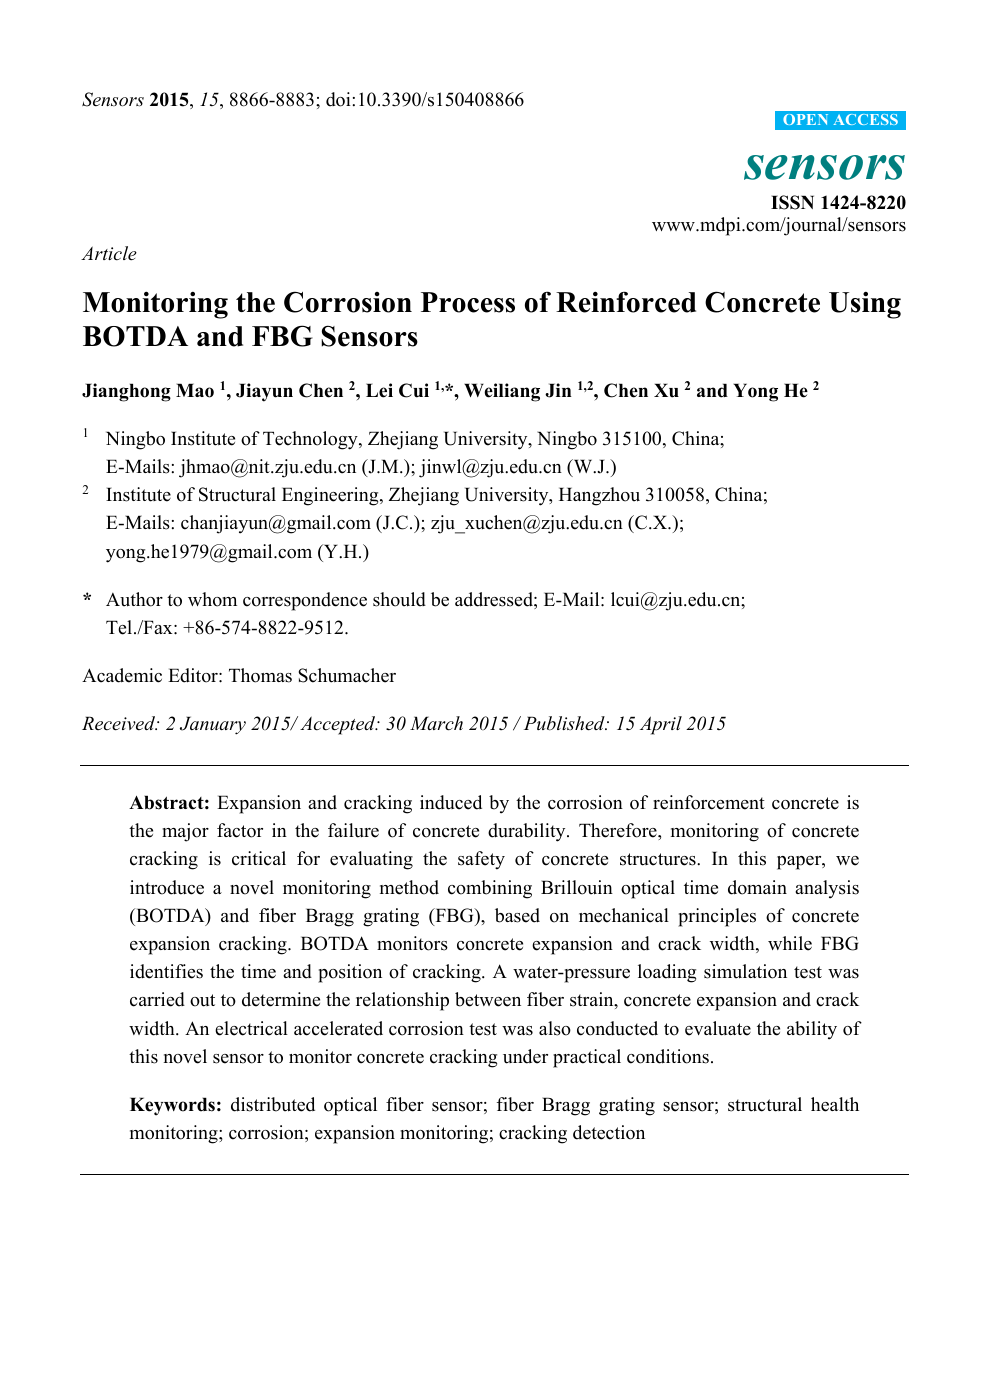 Monitoring The Corrosion Process Of Reinforced Concrete Using Botda And Fbg Sensors Topic Of Research Paper In Materials Engineering Download Scholarly Article Pdf And Read For Free On Cyberleninka Open Science